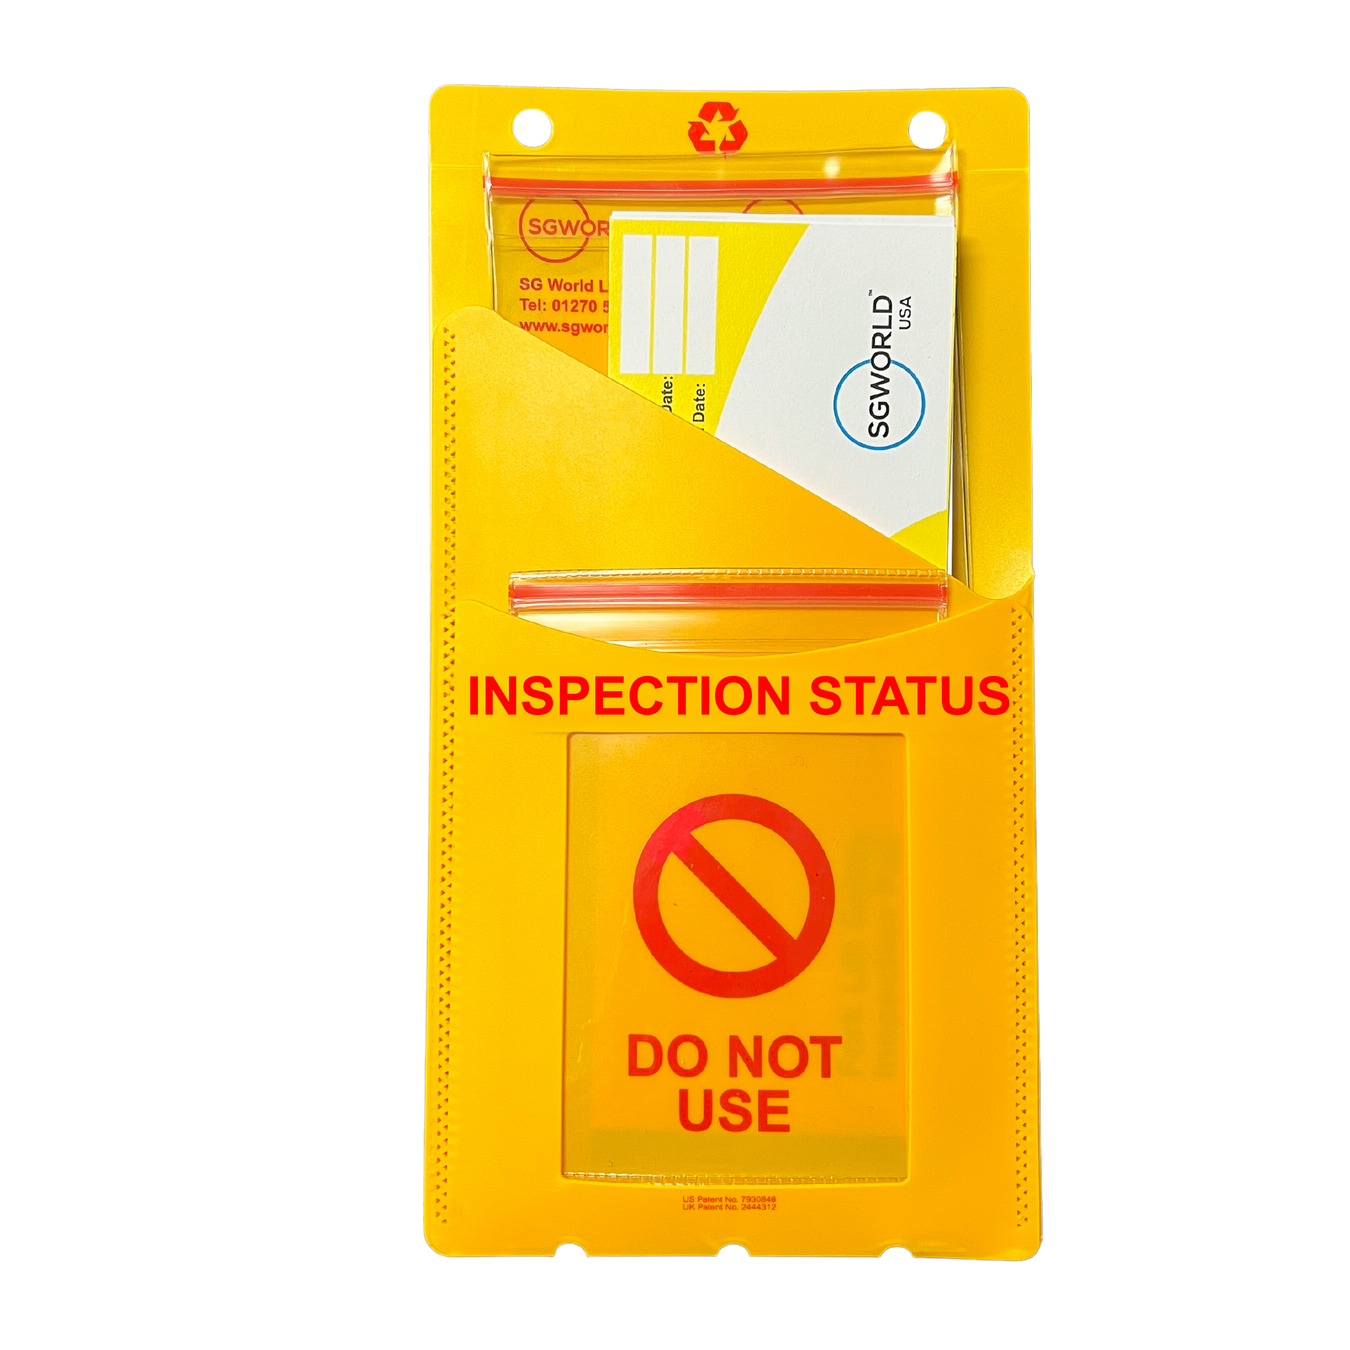 Inspection Checklists